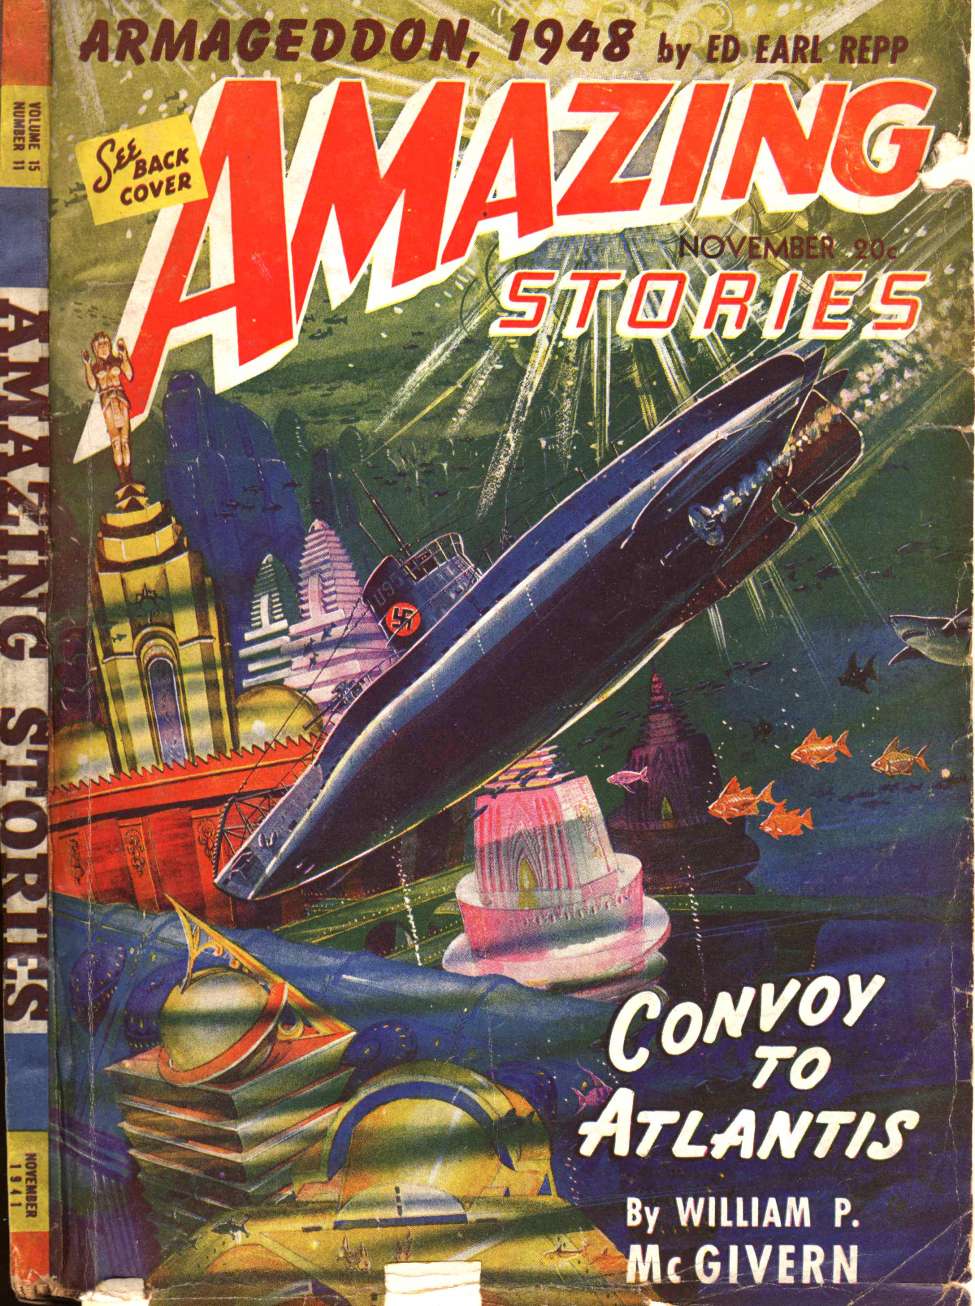 Book Cover For Amazing Stories v15 11 - Convoy to Atlantis - William P. McGivern